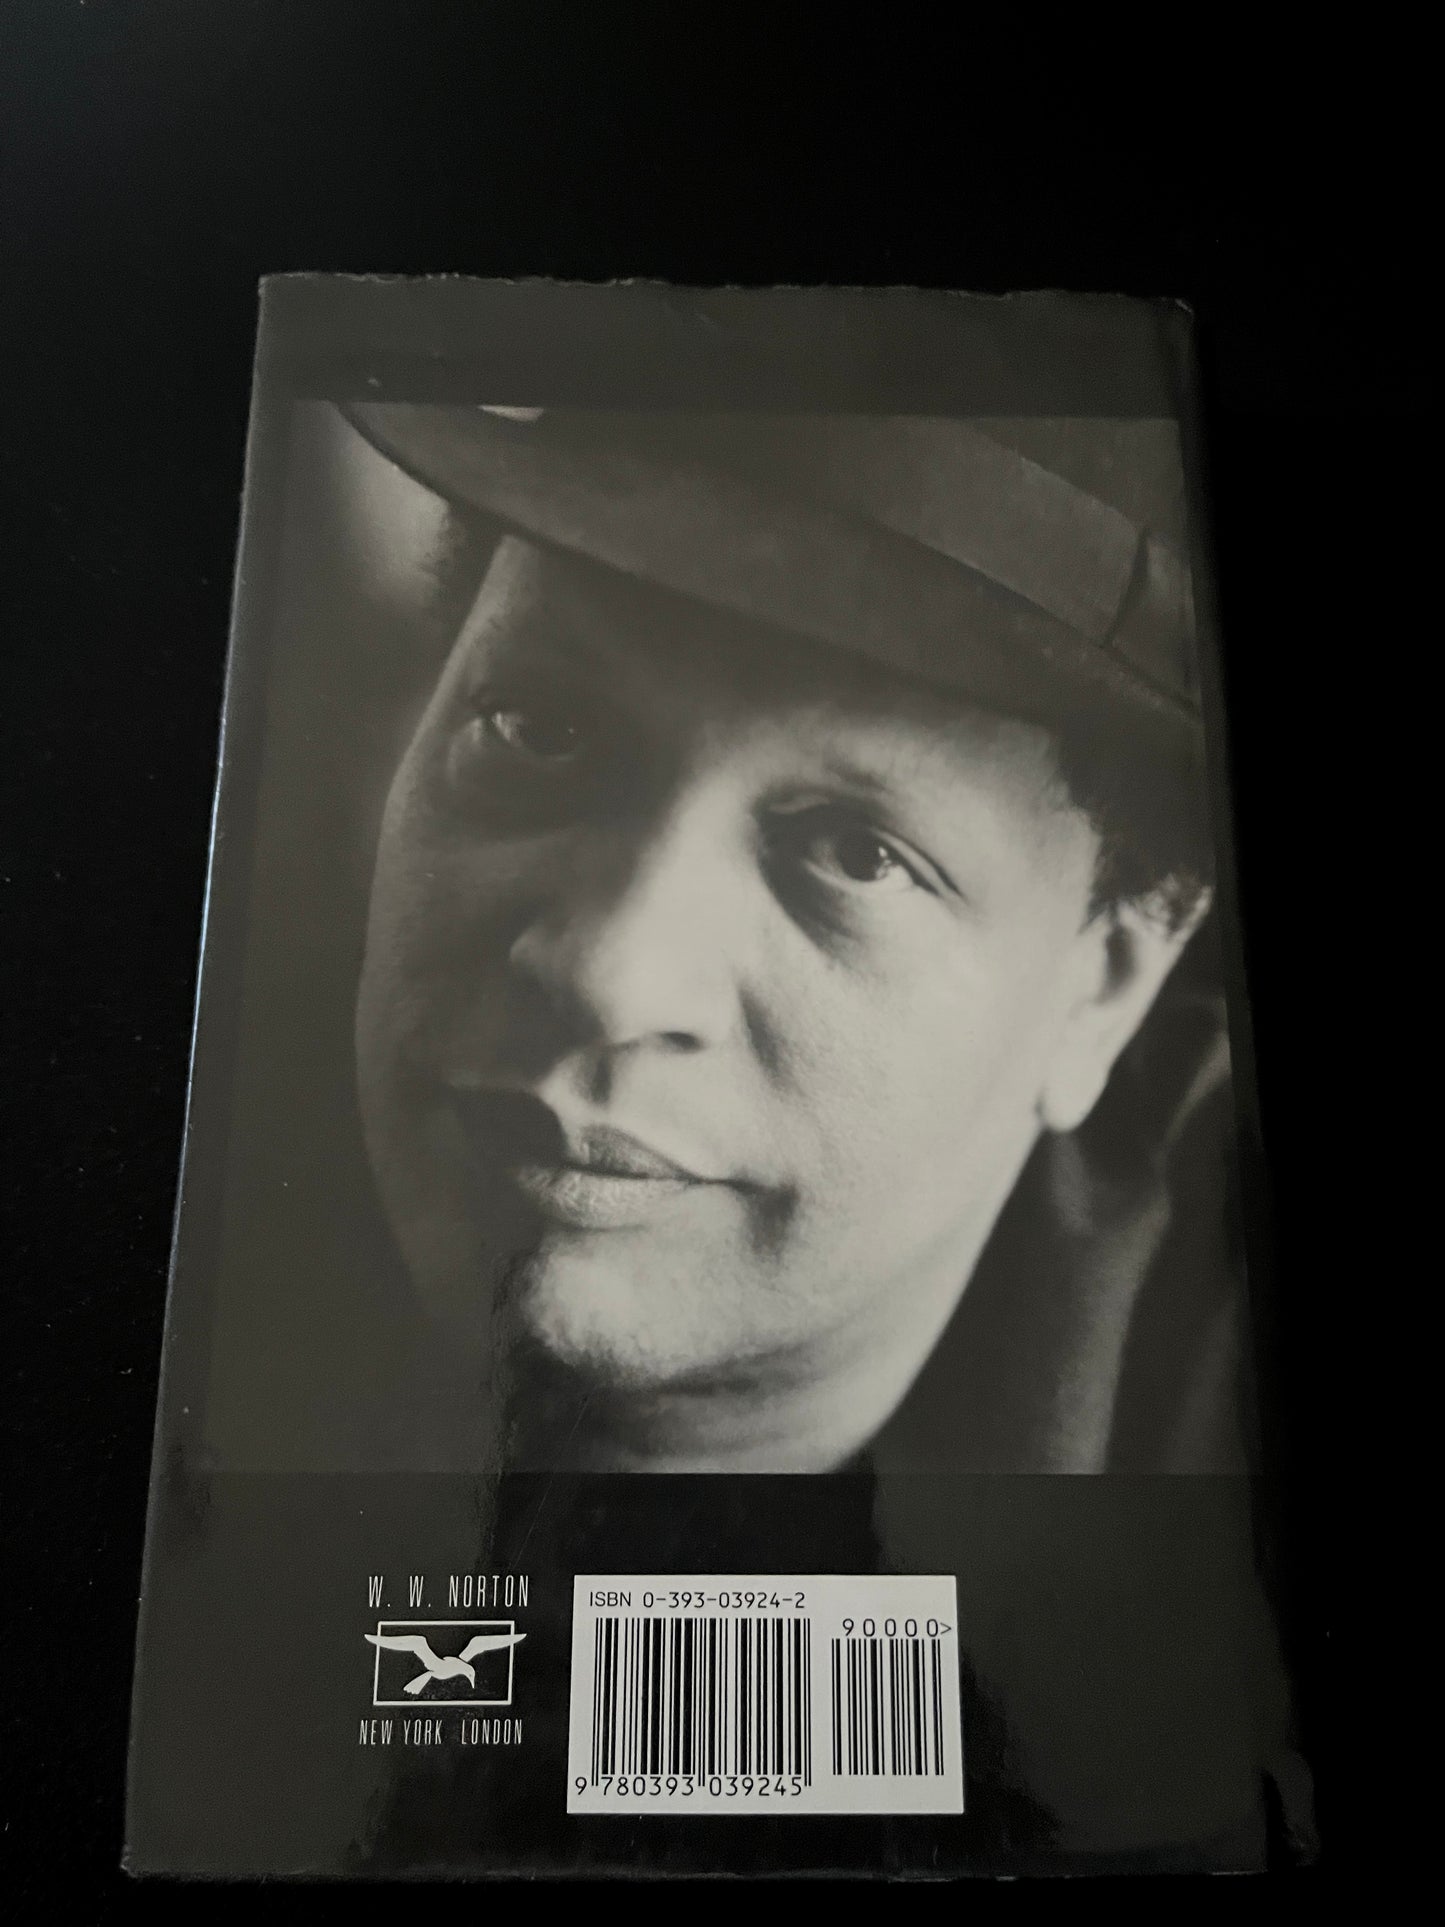 A LITTLE YELLOW DOG by Walter Mosley